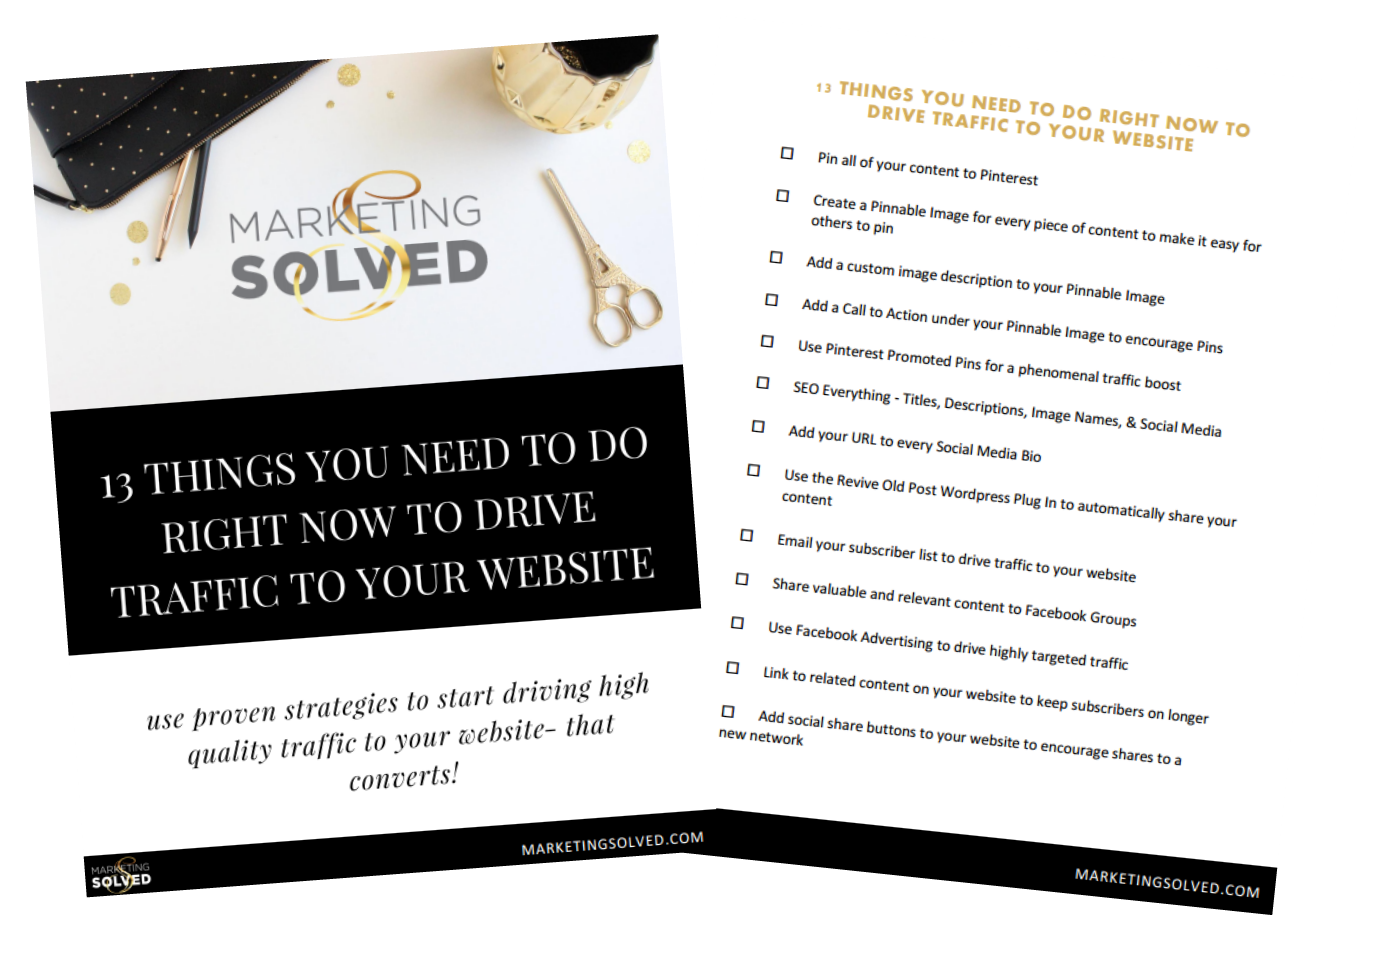 13 Things You Need to Do Right Now to Drive Traffic To Your Website Checklist - Marketing Solved 